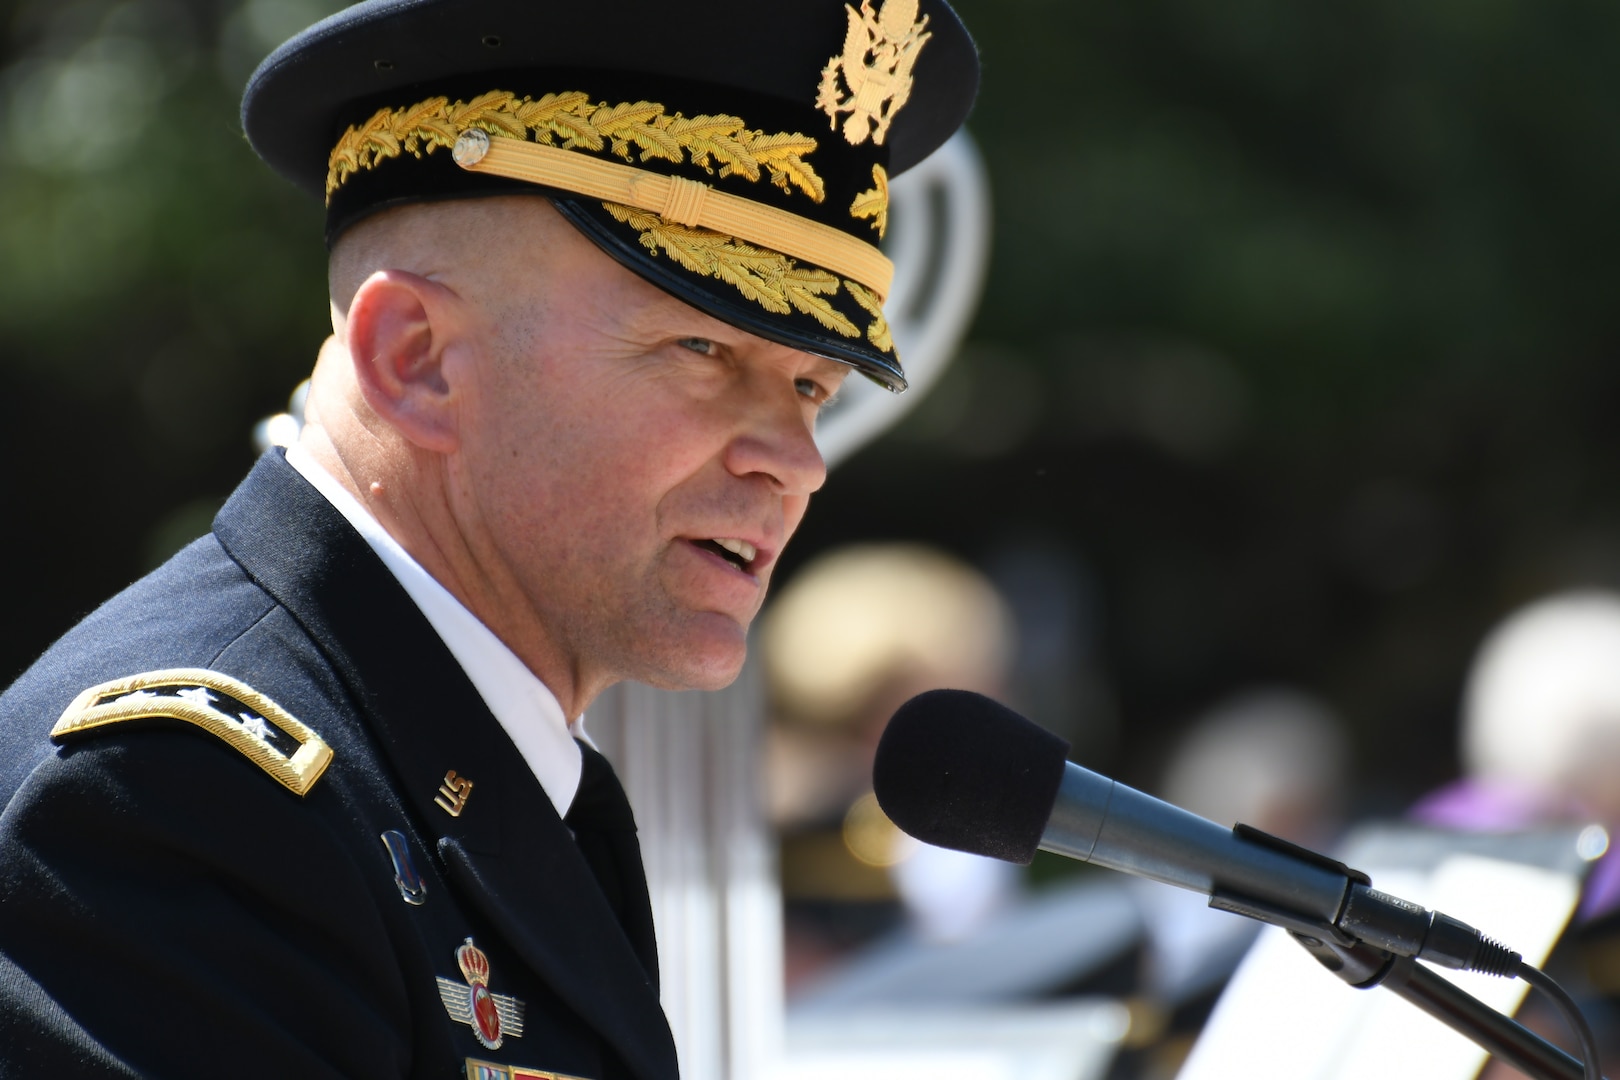 Lt. Gen. Jeffrey S. Buchanan, commander, U.S. Army North (Fifth Army), speaks about the military’s historical involvement with the local community during Army Day at the Alamo April 24. Army Day at the Alamo is one of the celebrations of Fiesta 2018, a 10-day event honoring those who fought and won the battles of the Alamo and San Jacinto.